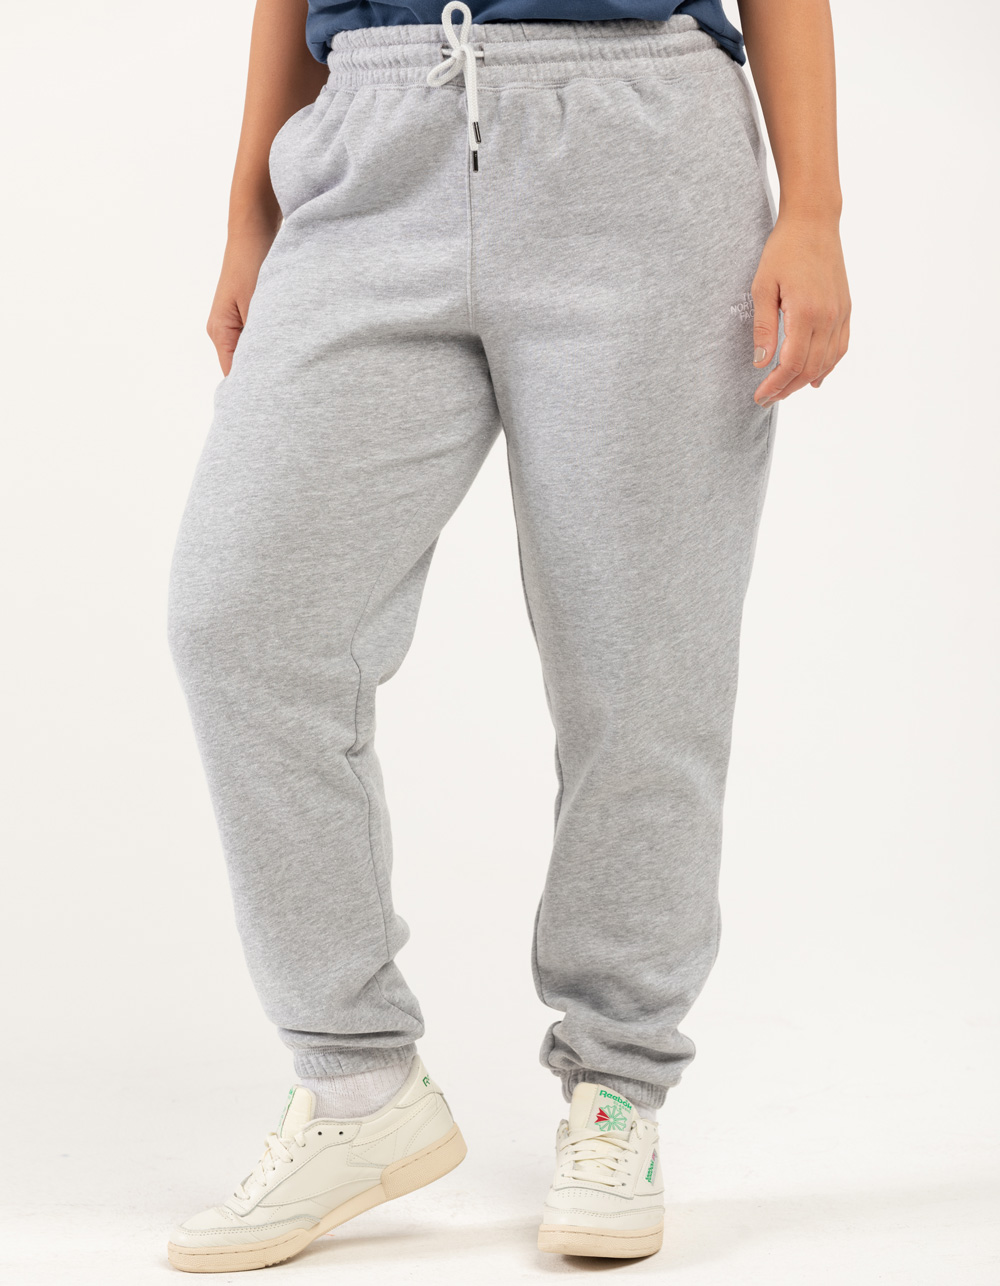 THE NORTH FACE Half Dome Womens Sweatpants - HEATHER GRAY | Tillys